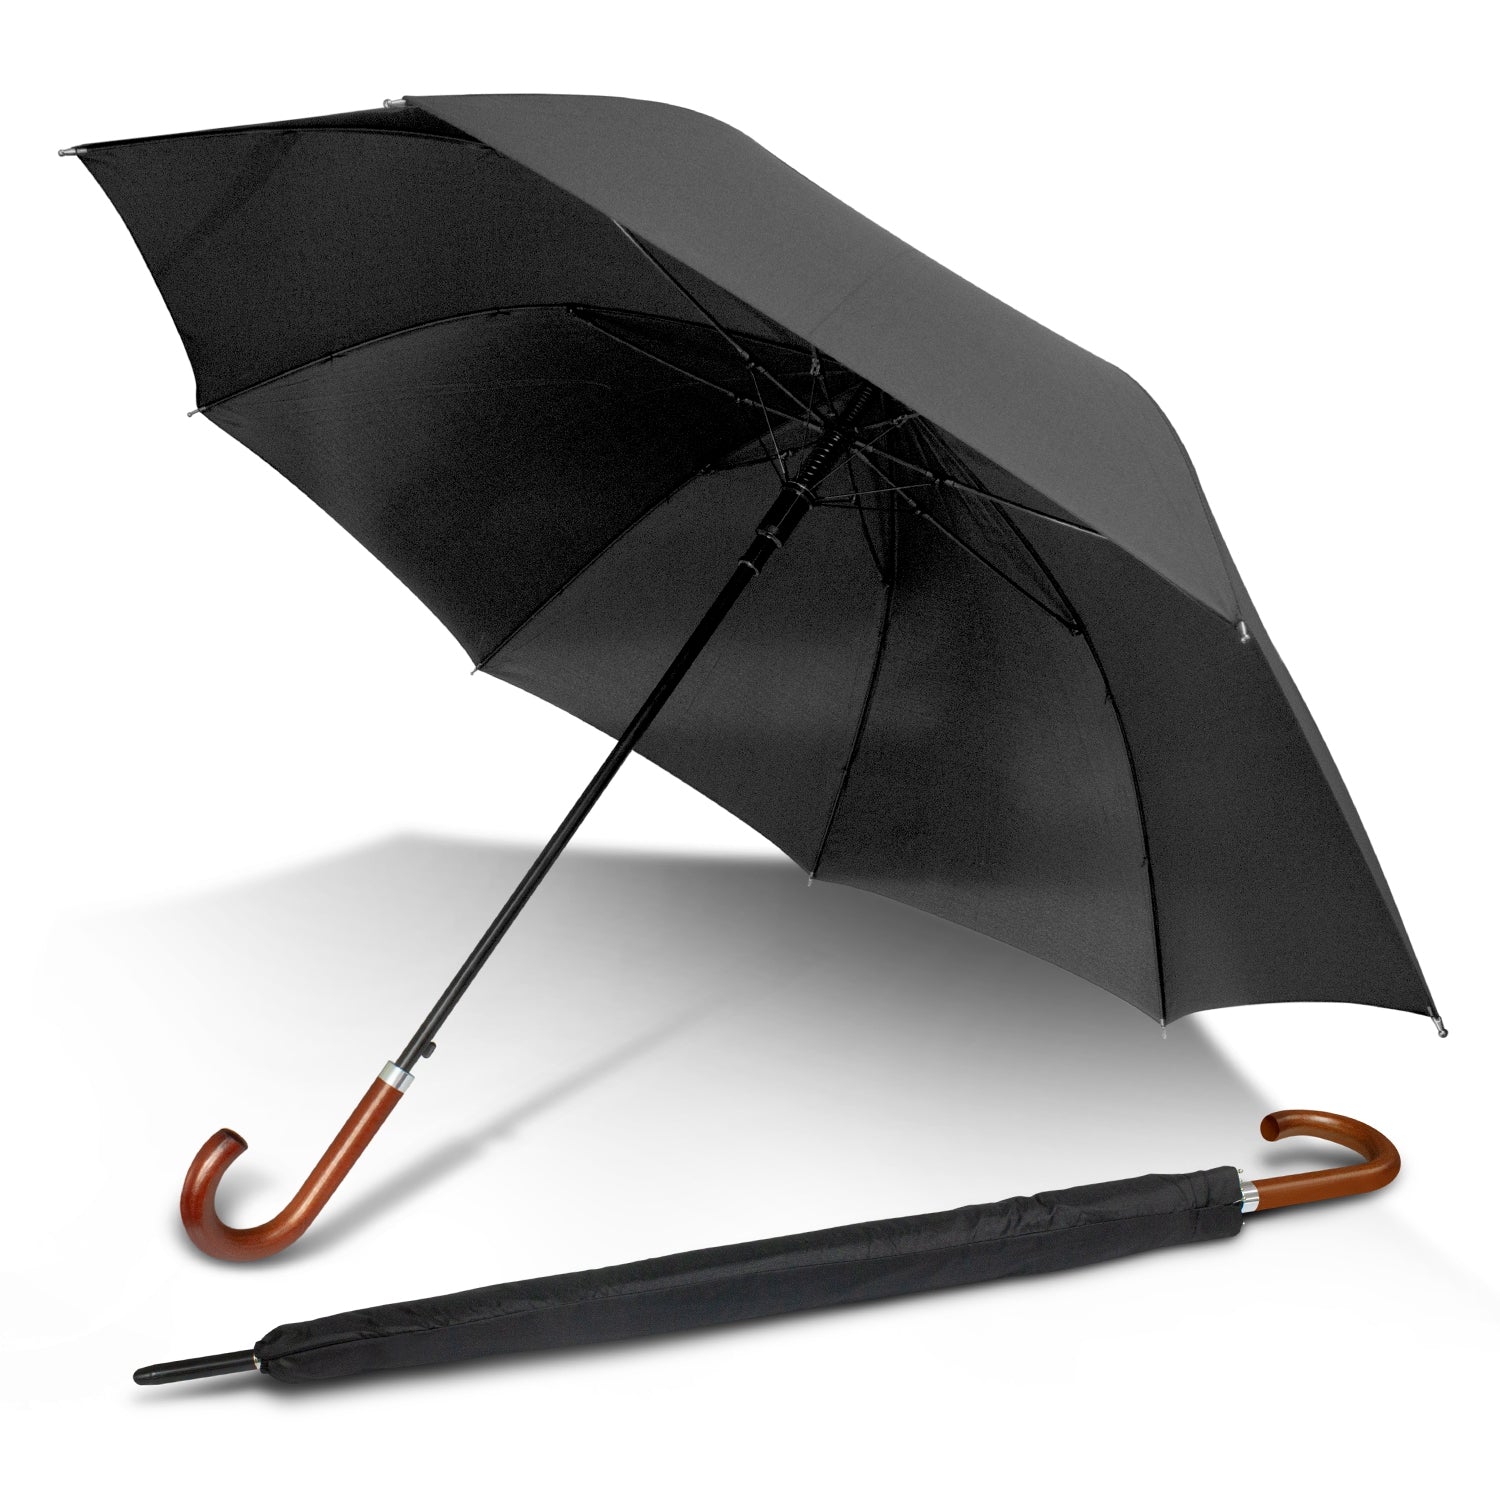 STORMPROOF®️ Corporate Executive Hook Umbrella With Premium Pongee Canopy, Wind Resistant Frame, Steel Shaft, With Auto-Open Push Button Feature - Premium Wooden Hook Handle